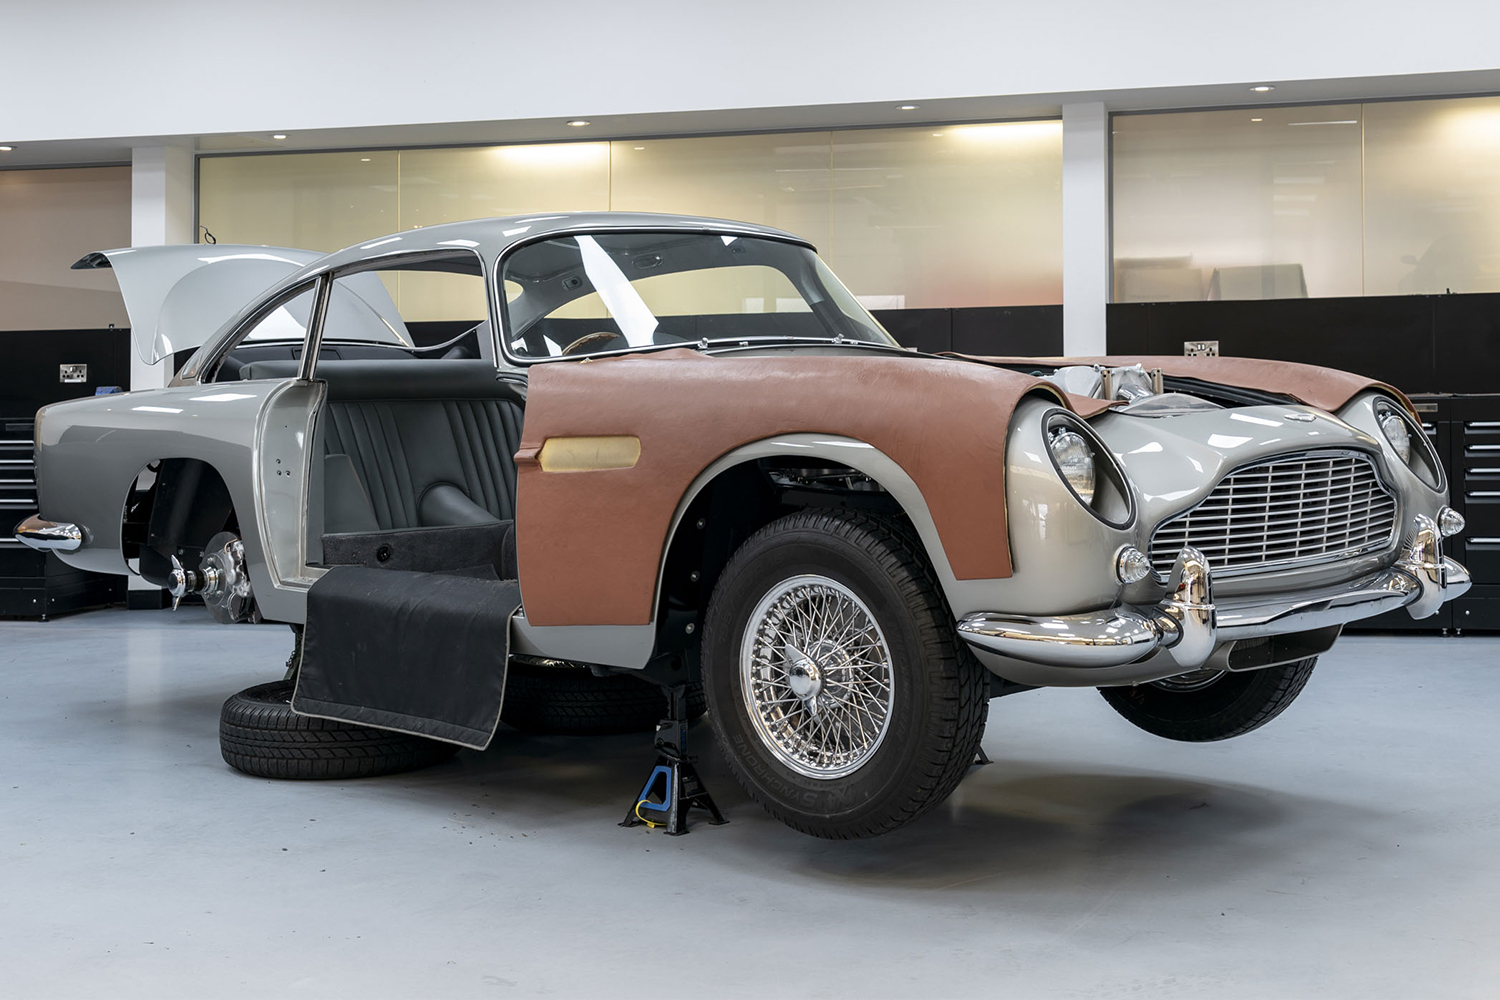 Aston Martin’s “Goldfinger” Replica Cars Will Have Actual, Working Gadgets